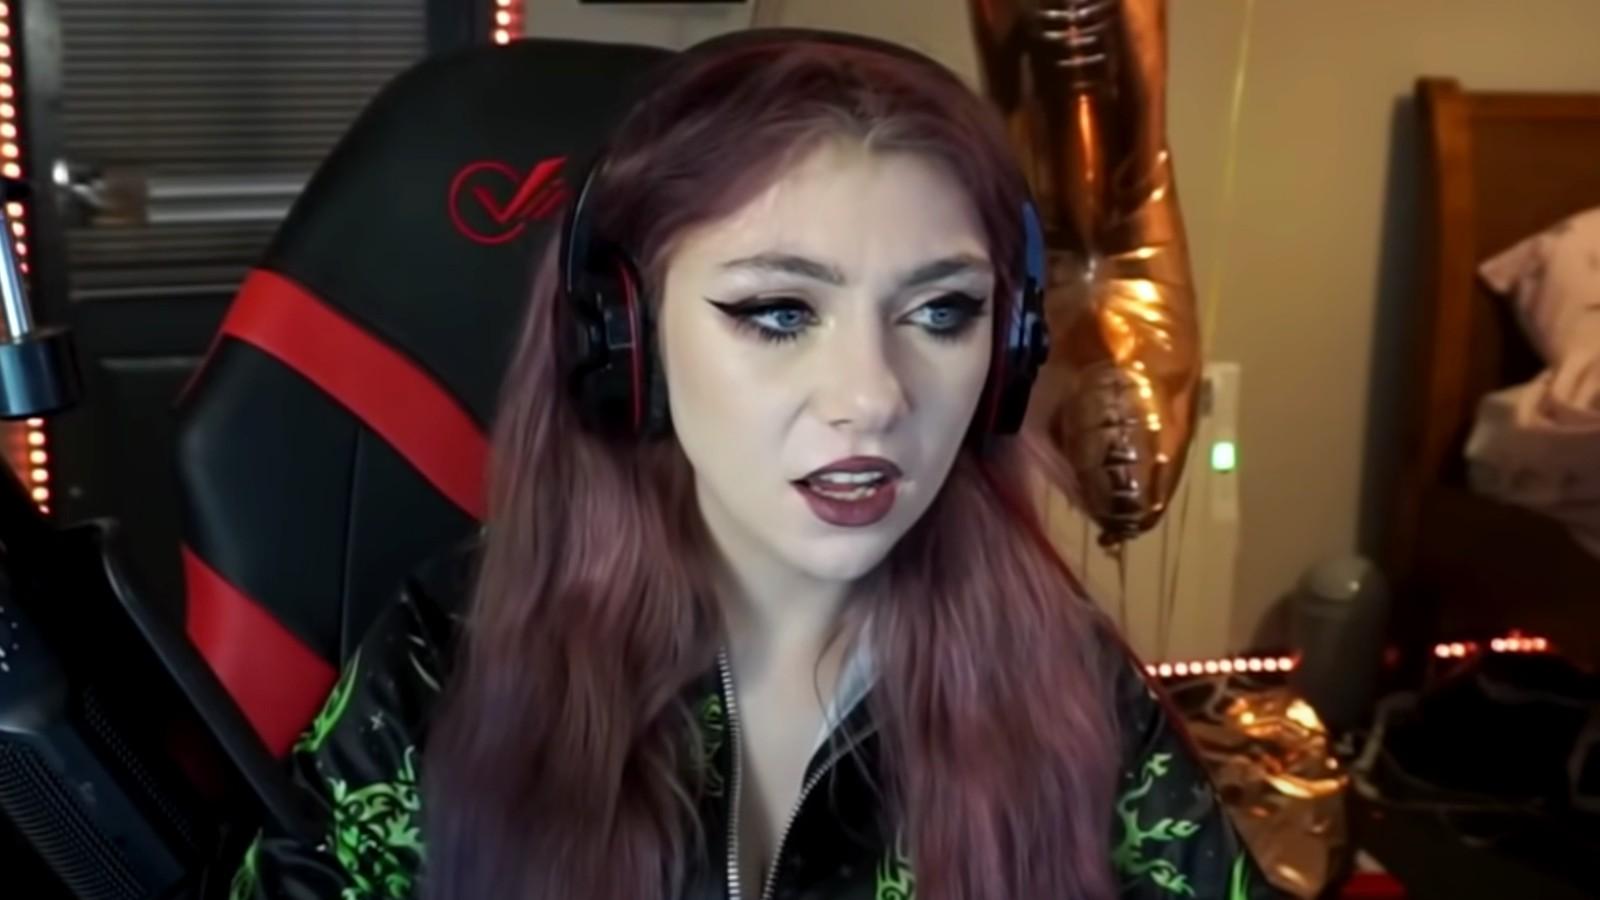 JustaMinx lashes out at TikTok after getting banned third time in a row due  to mass reporting